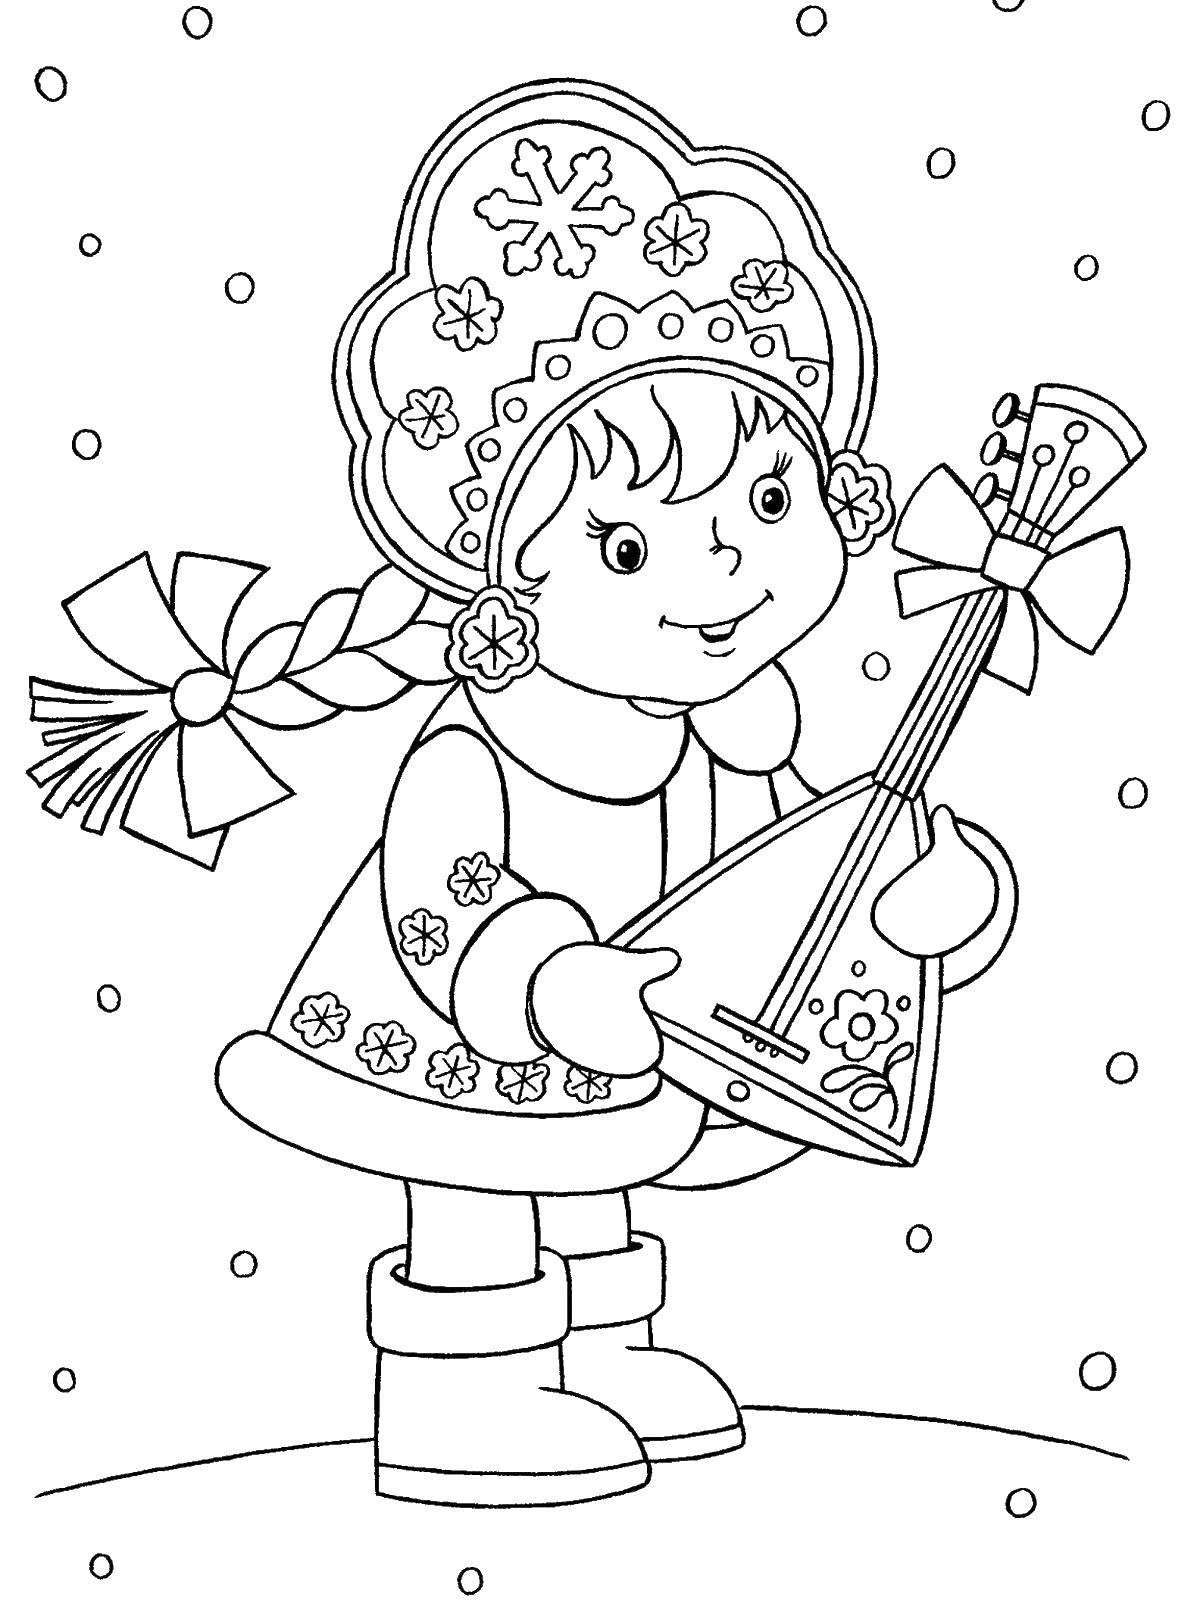 Coloring The snow maiden by balalaikas. Category coloring pages for girls. Tags:  balalaika, snow maiden.